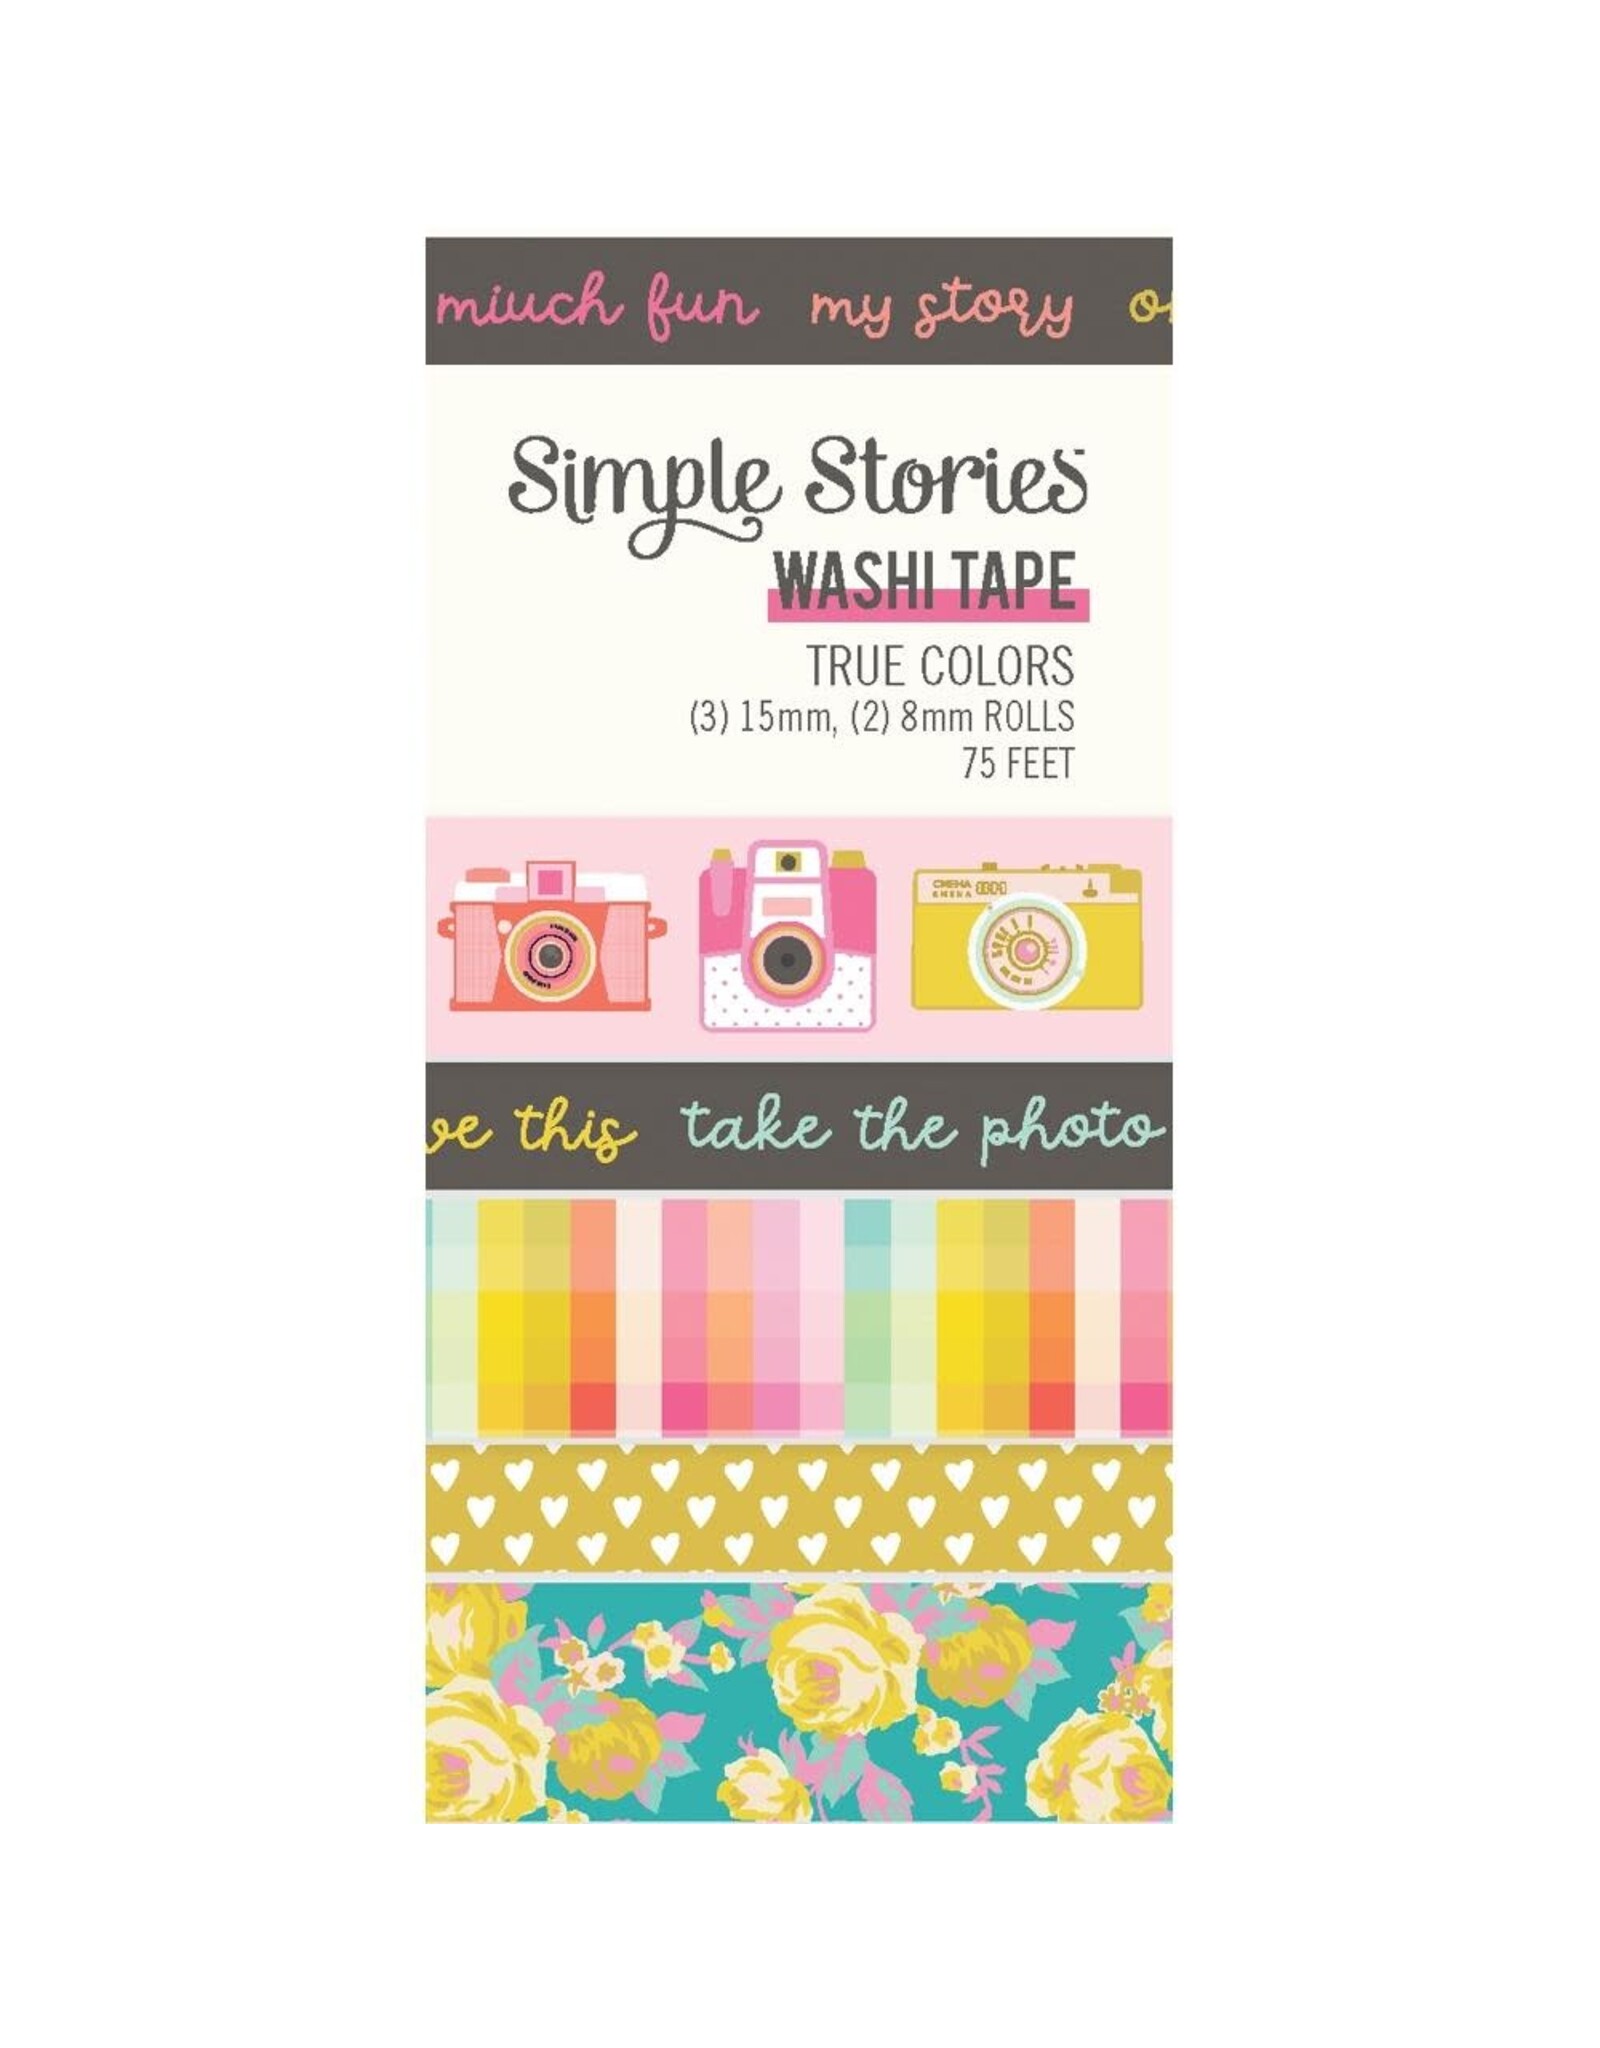 Simple Stories True Colors Washi Tape